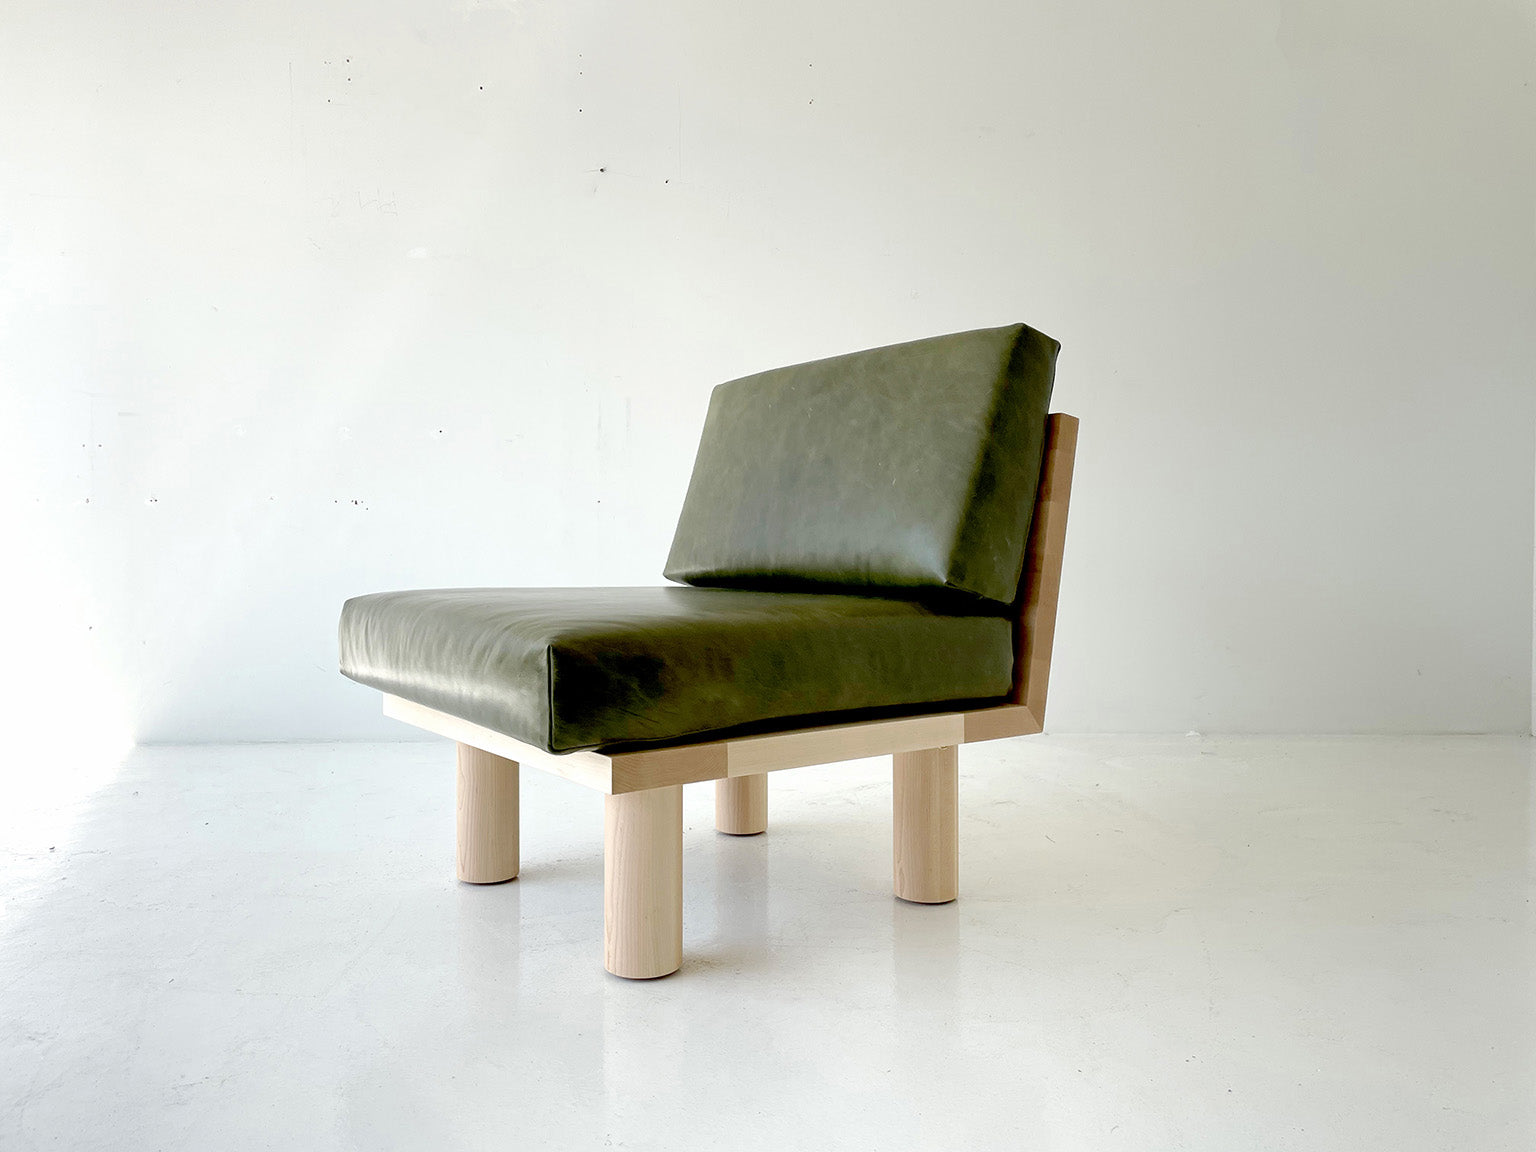  Turned Leg Suelo Side Chair In Leather And Maple - 3021, 10